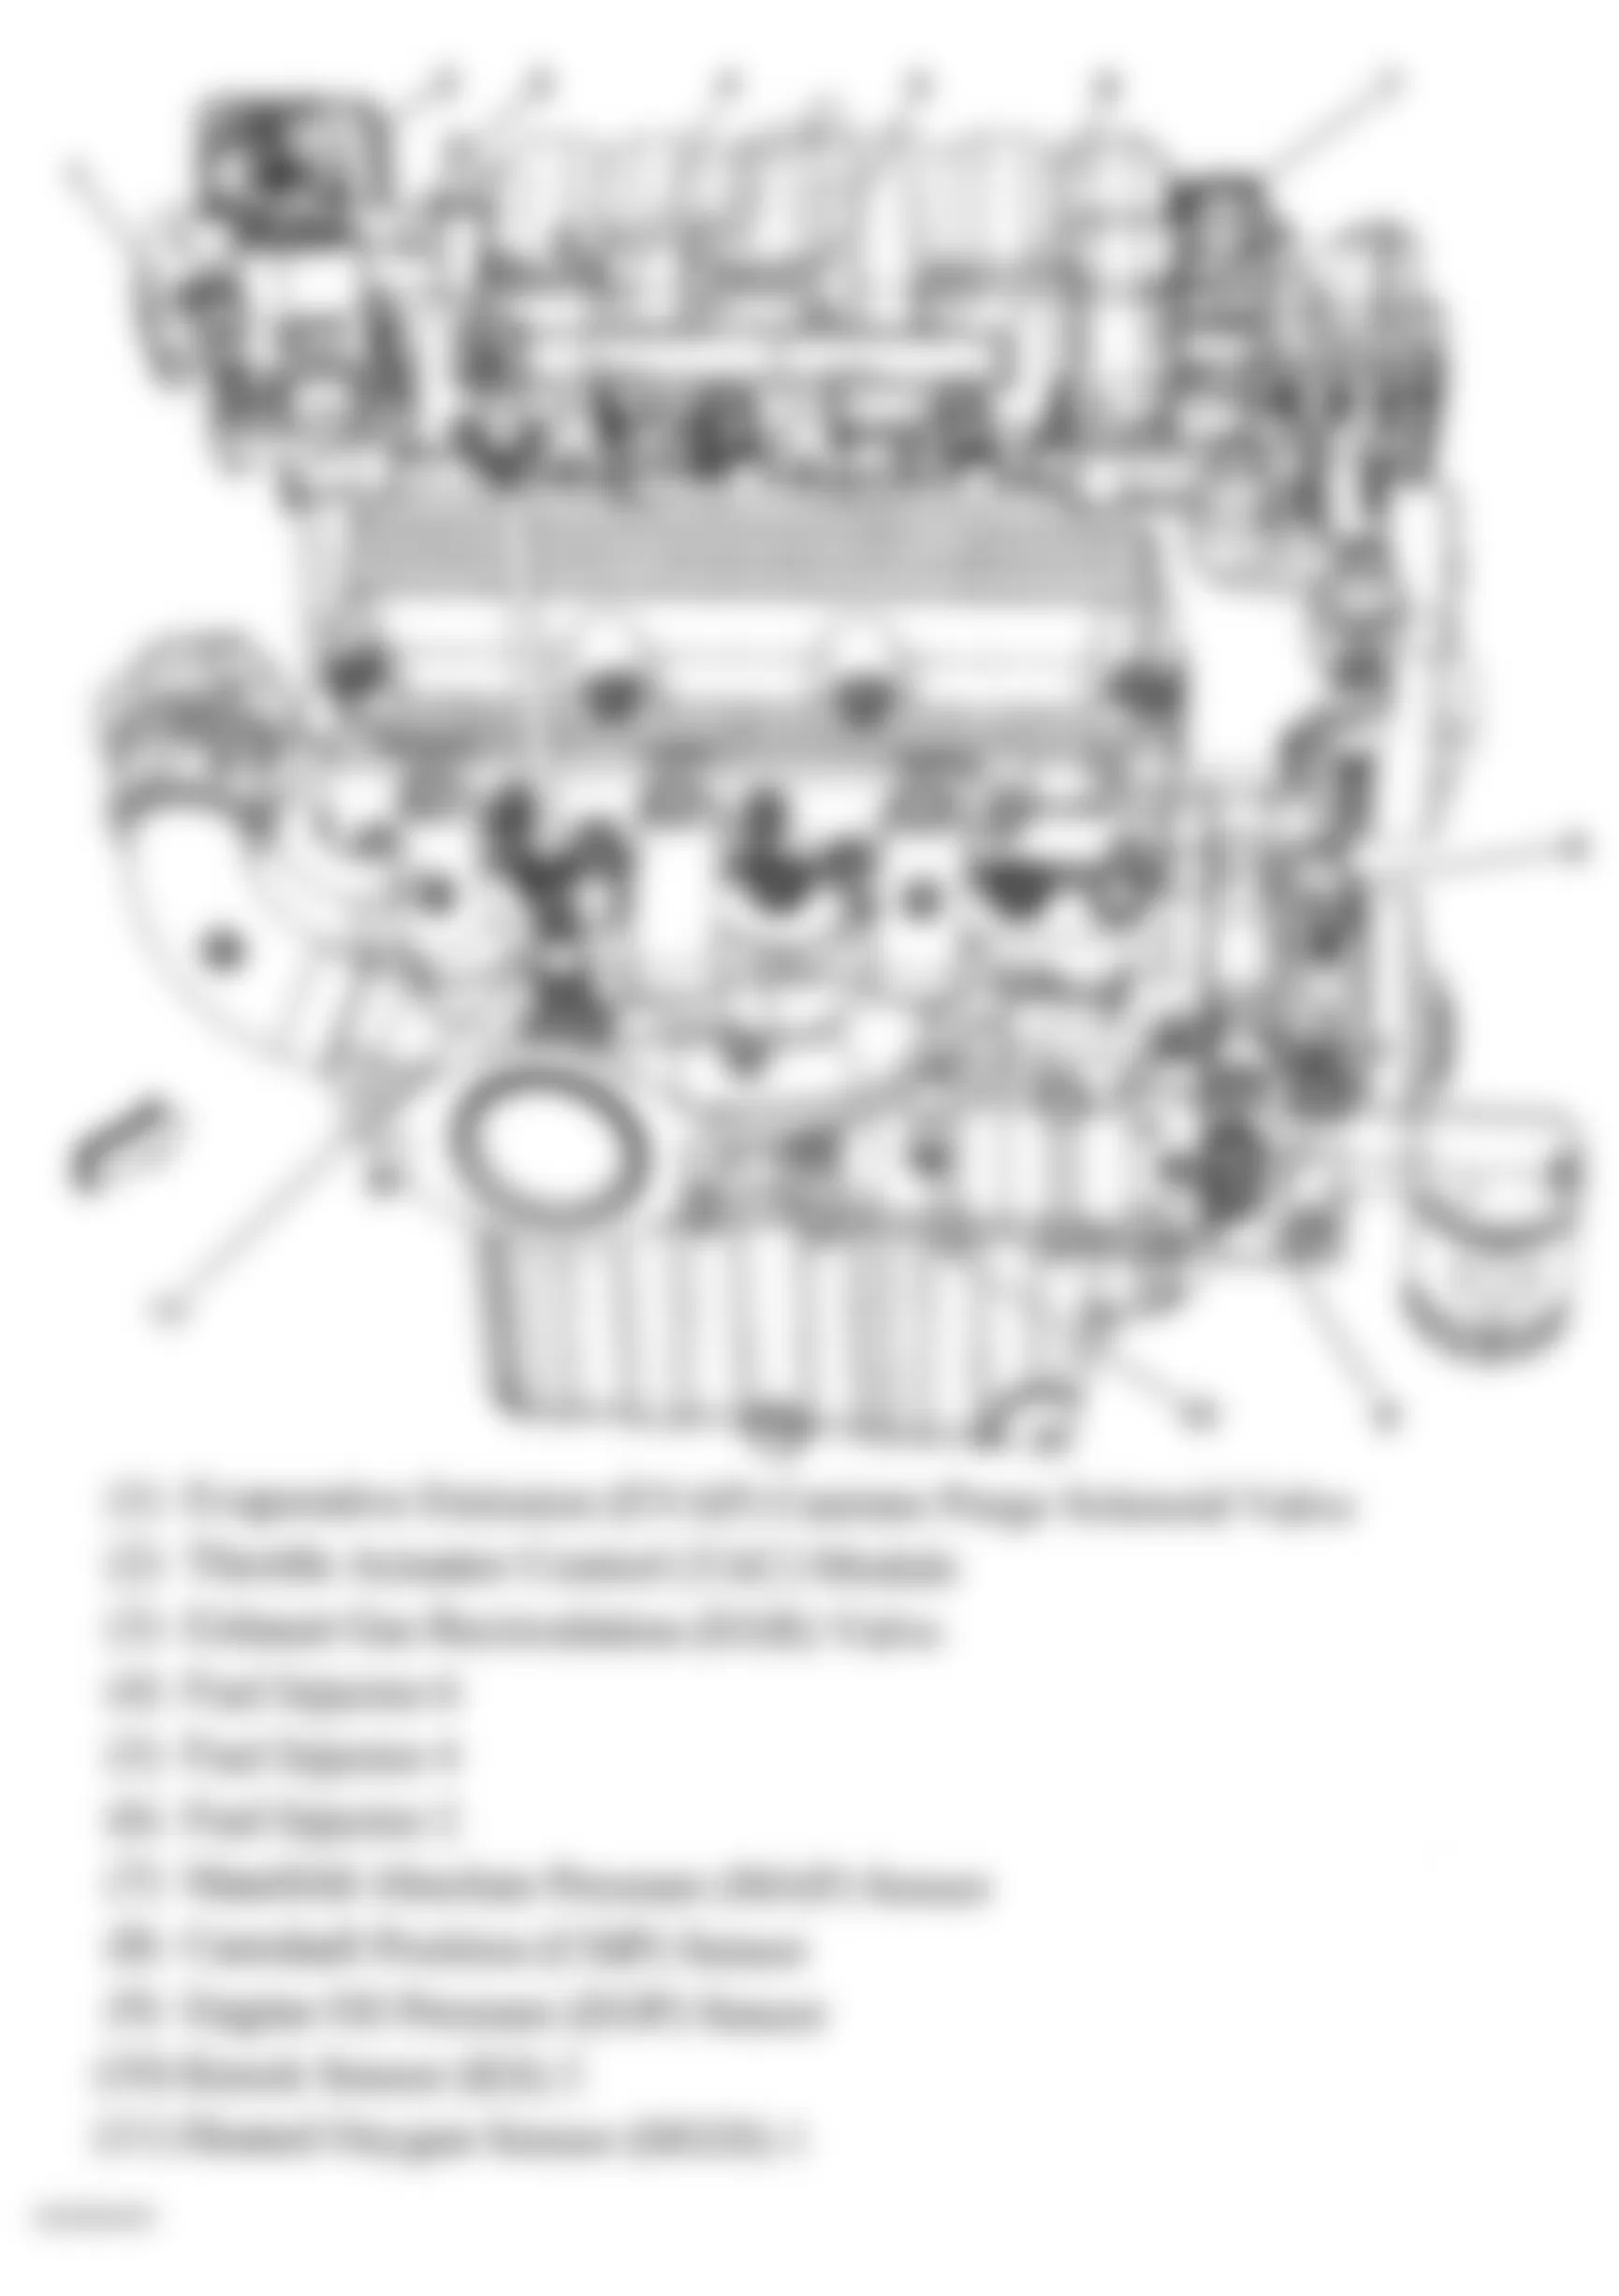 Buick LaCrosse CX 2008 - Component Locations -  Right Side Of Engine (3.8L)